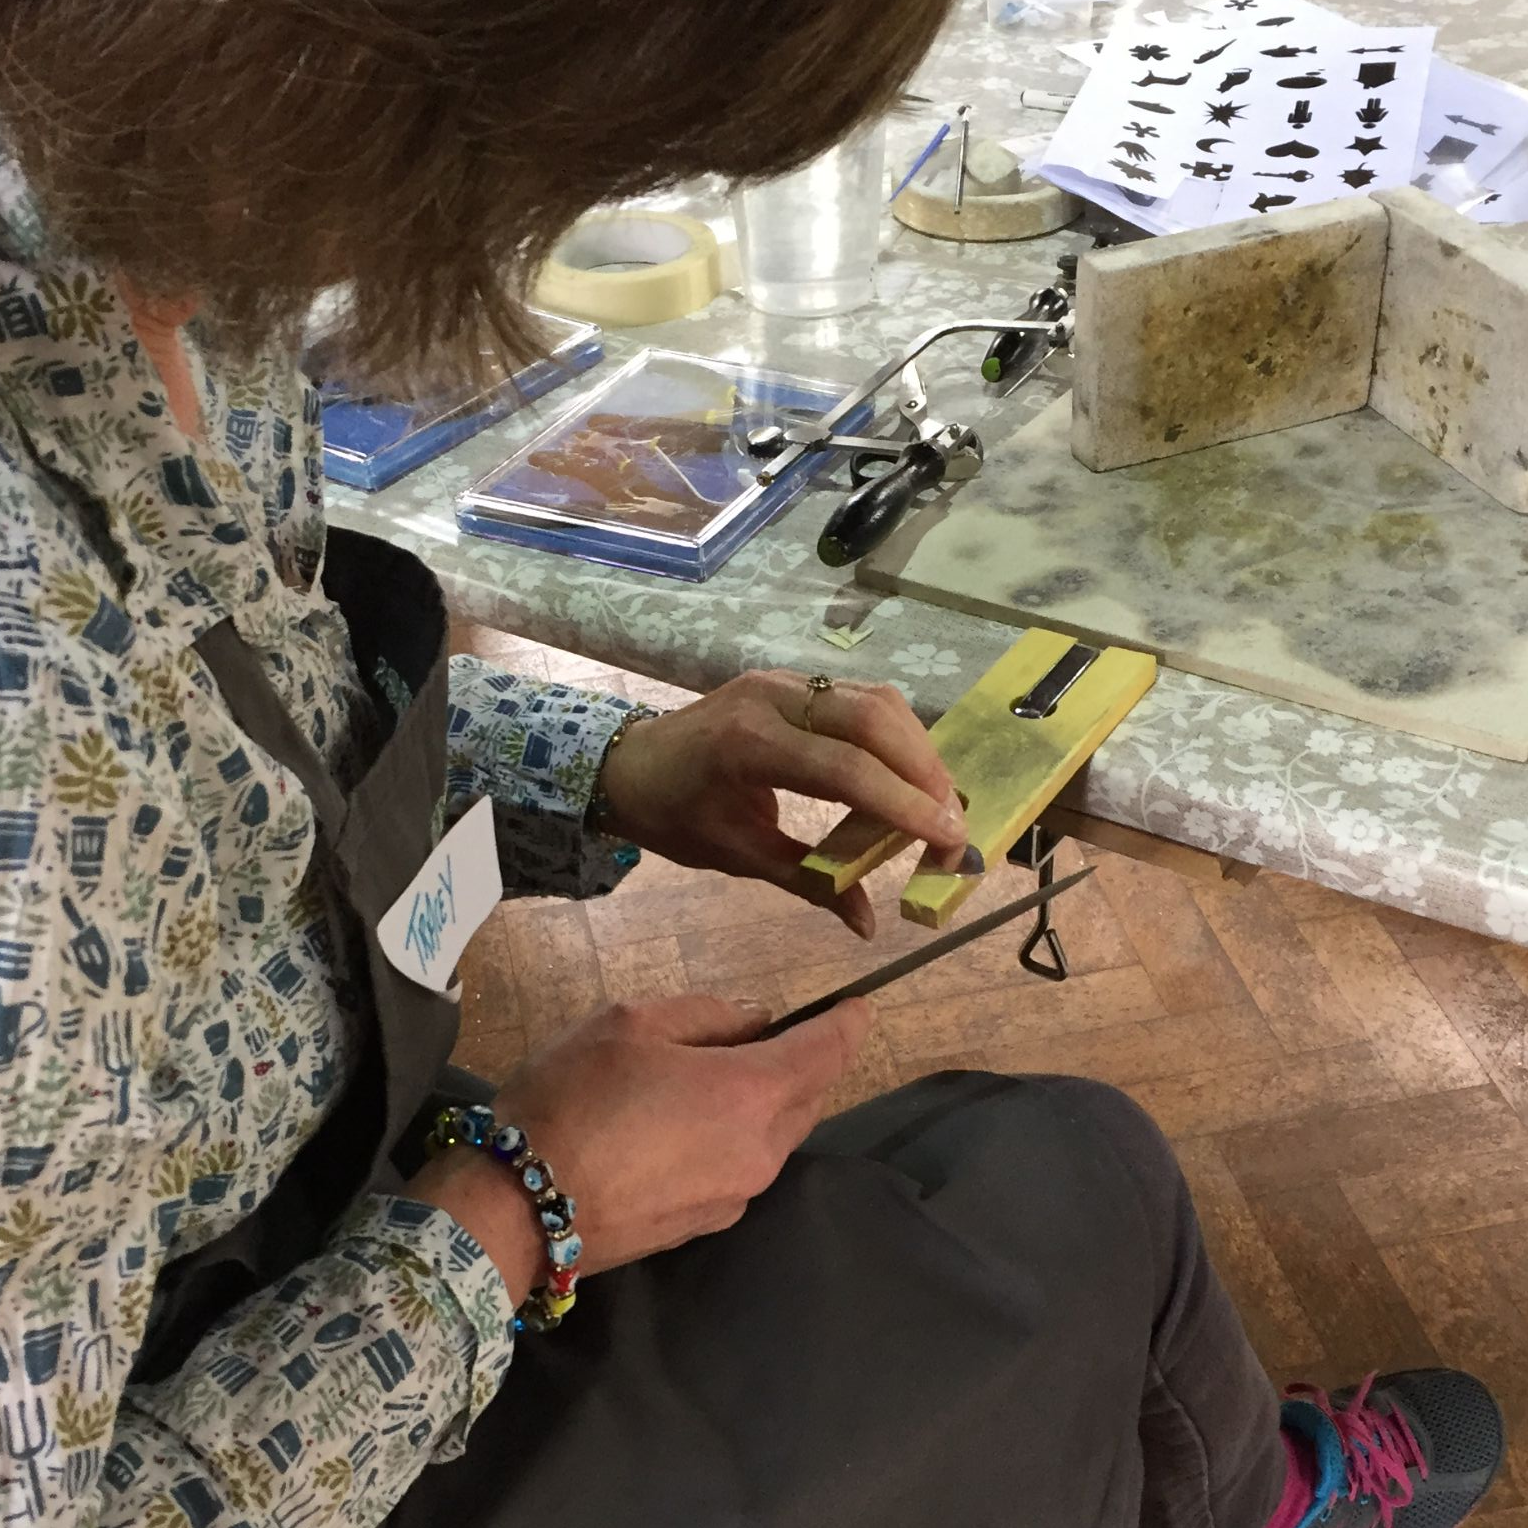 Silver Earrings and Pendant Workshop - Sawing